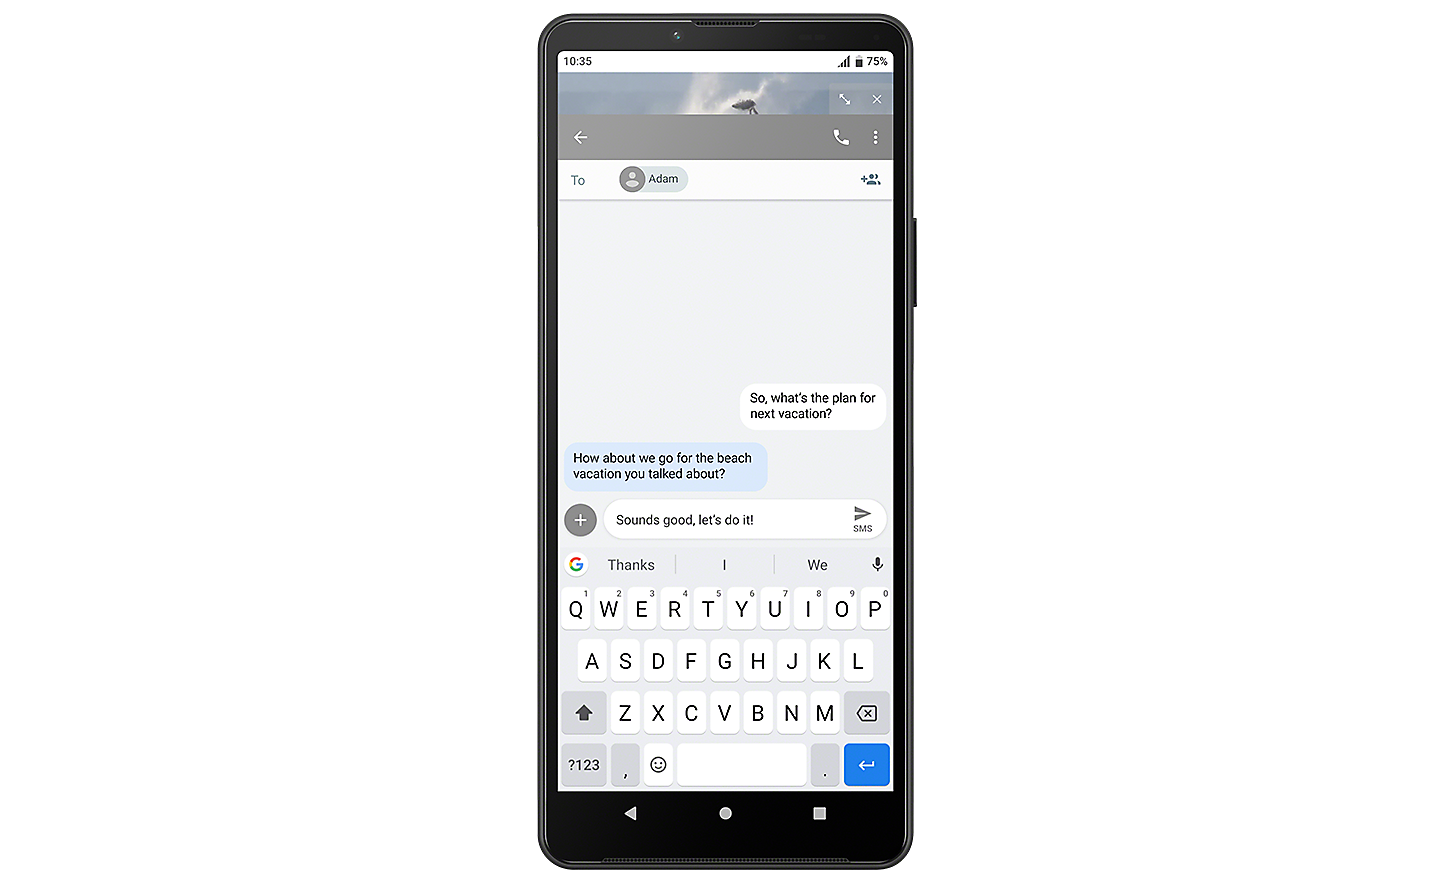 Xperia 10 IV display showing messaging on the Pop-up window